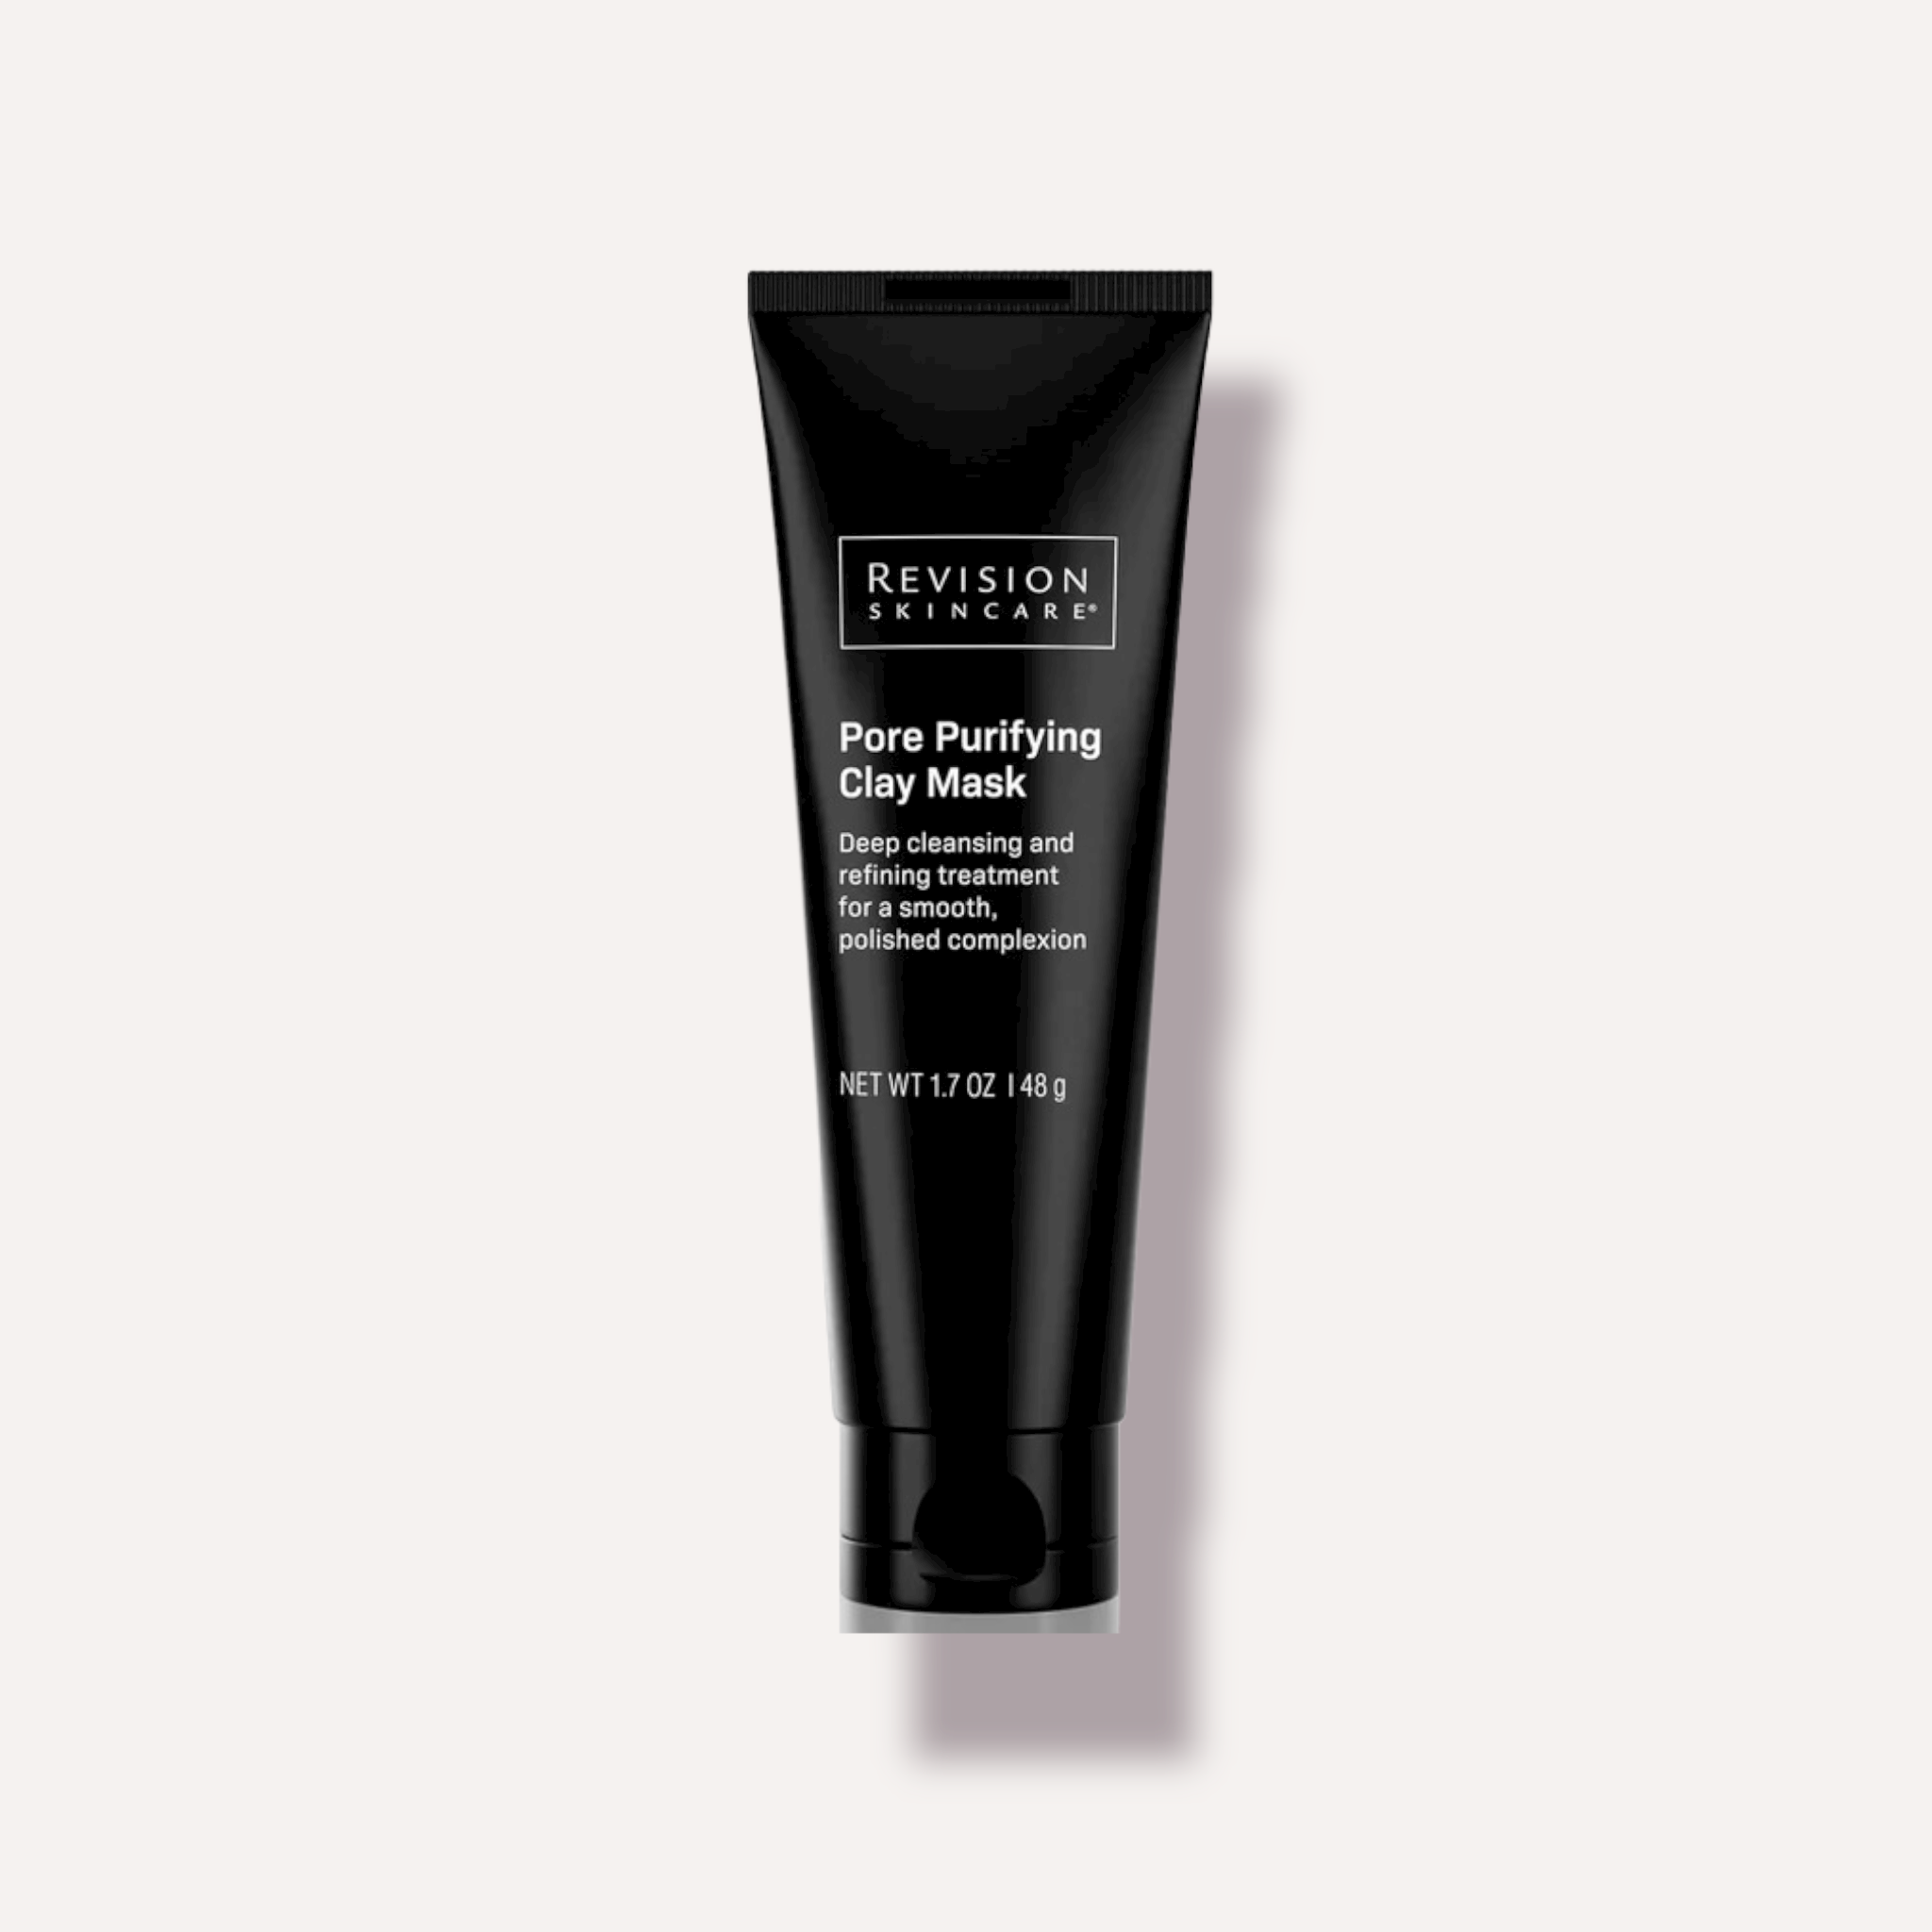 Revision Skincare Pore Purifying Clay Mask